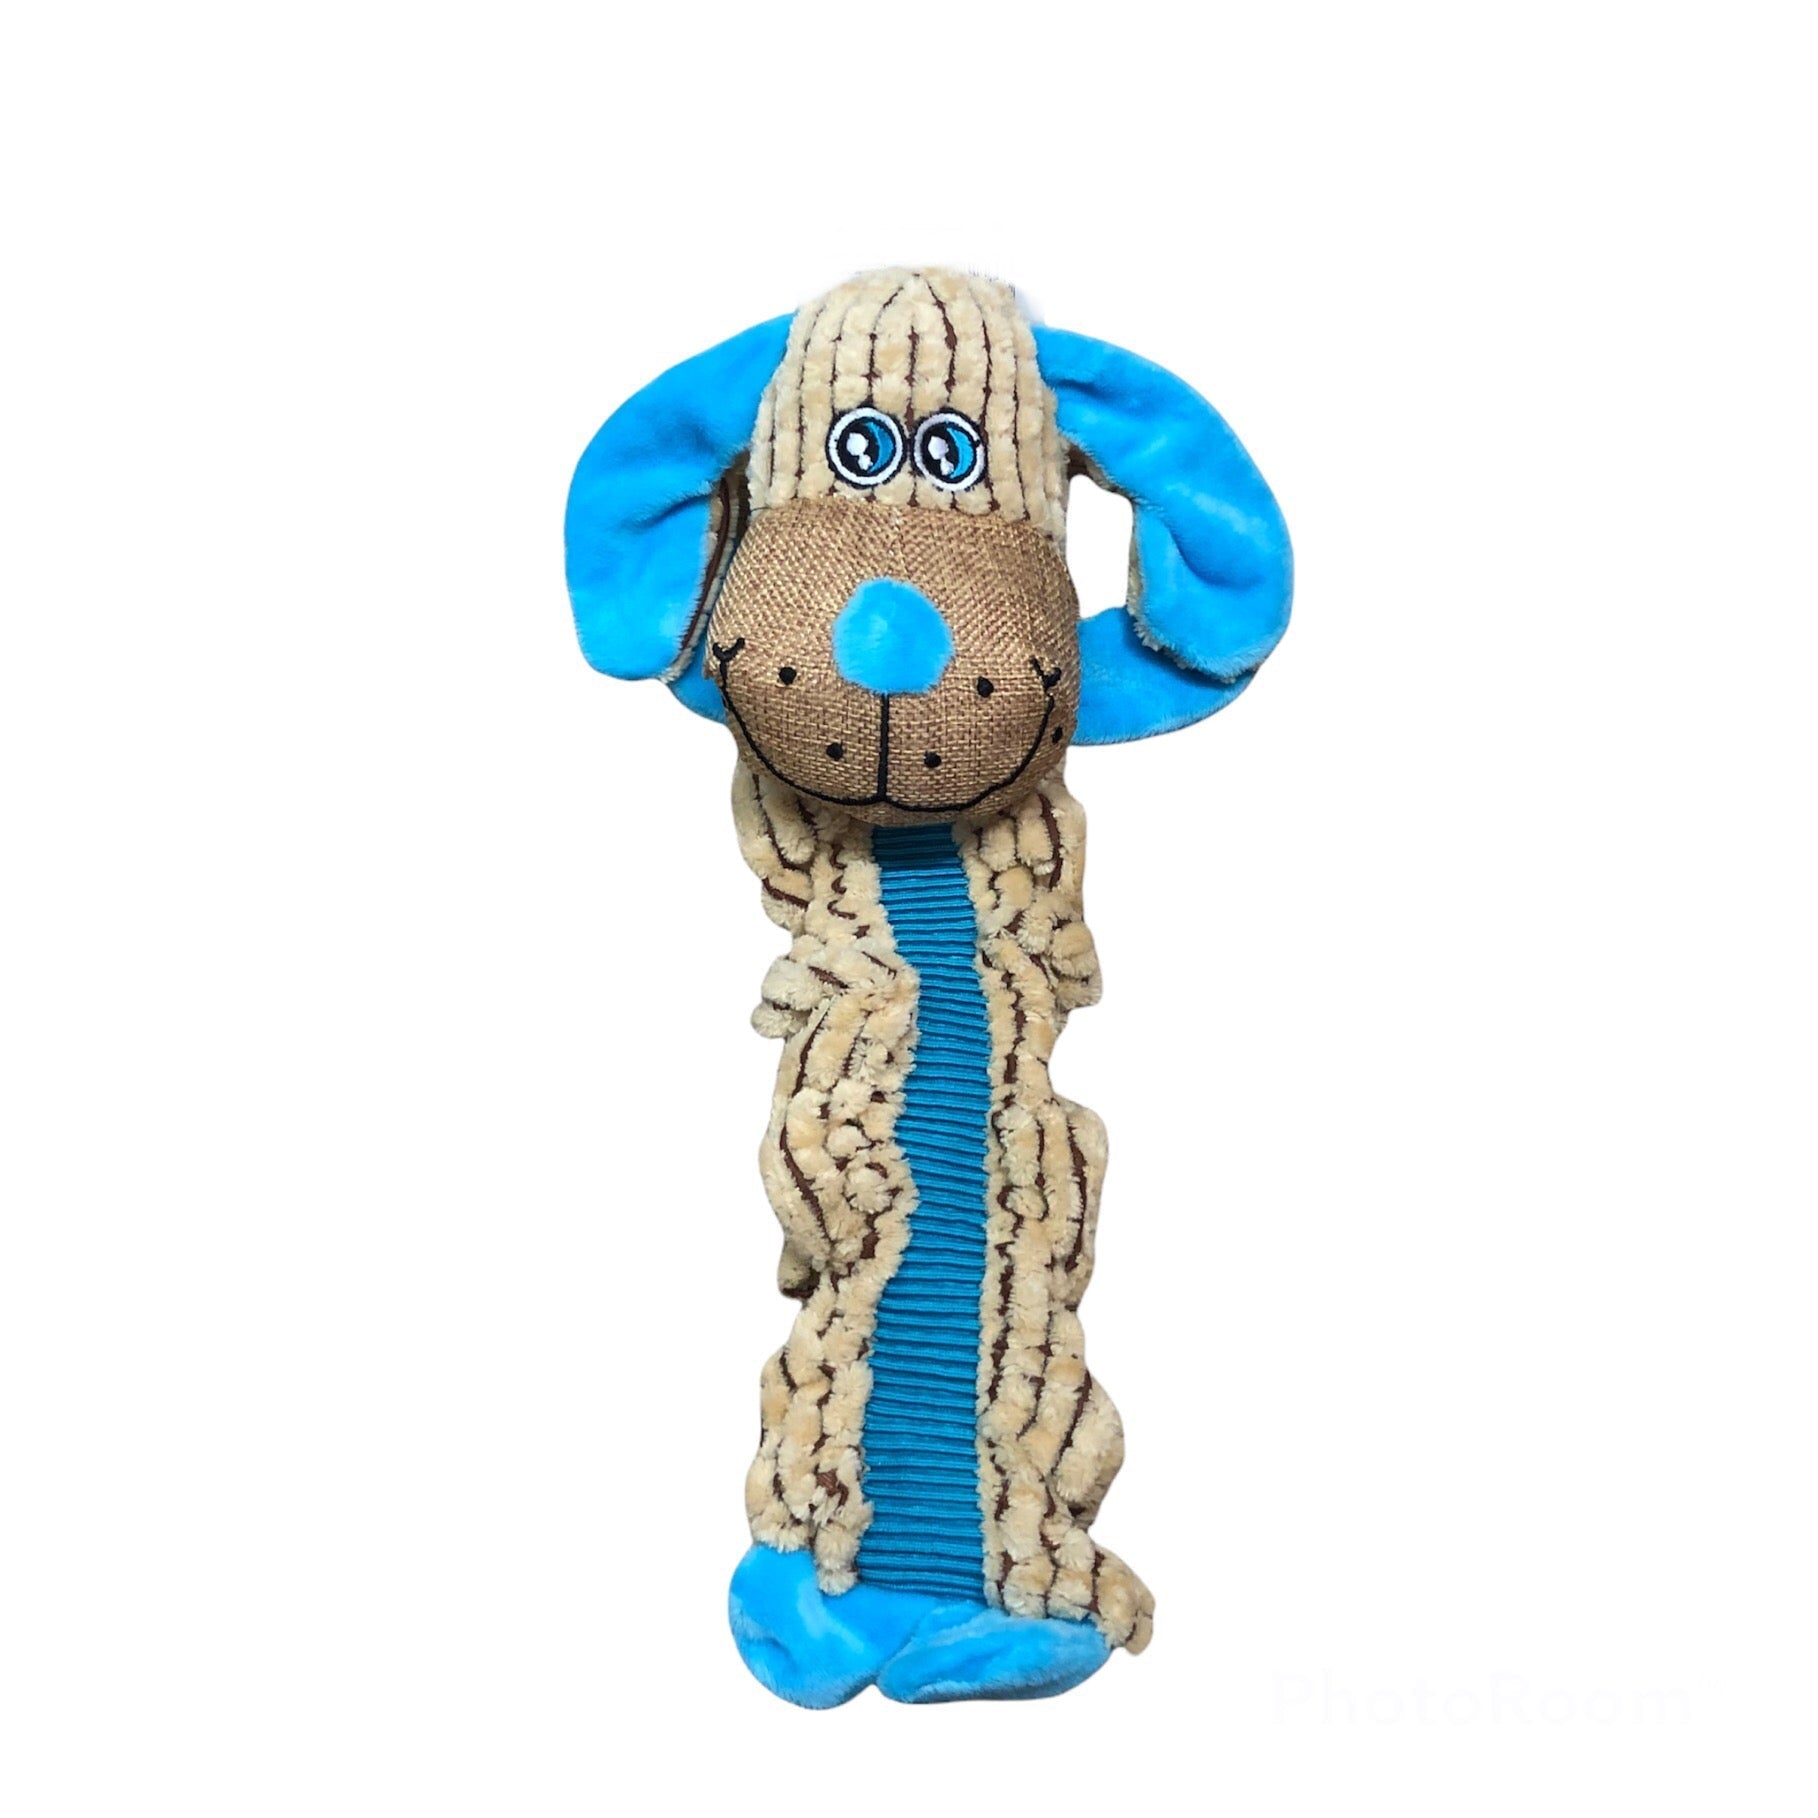 Beige dog with whistle toy for dog